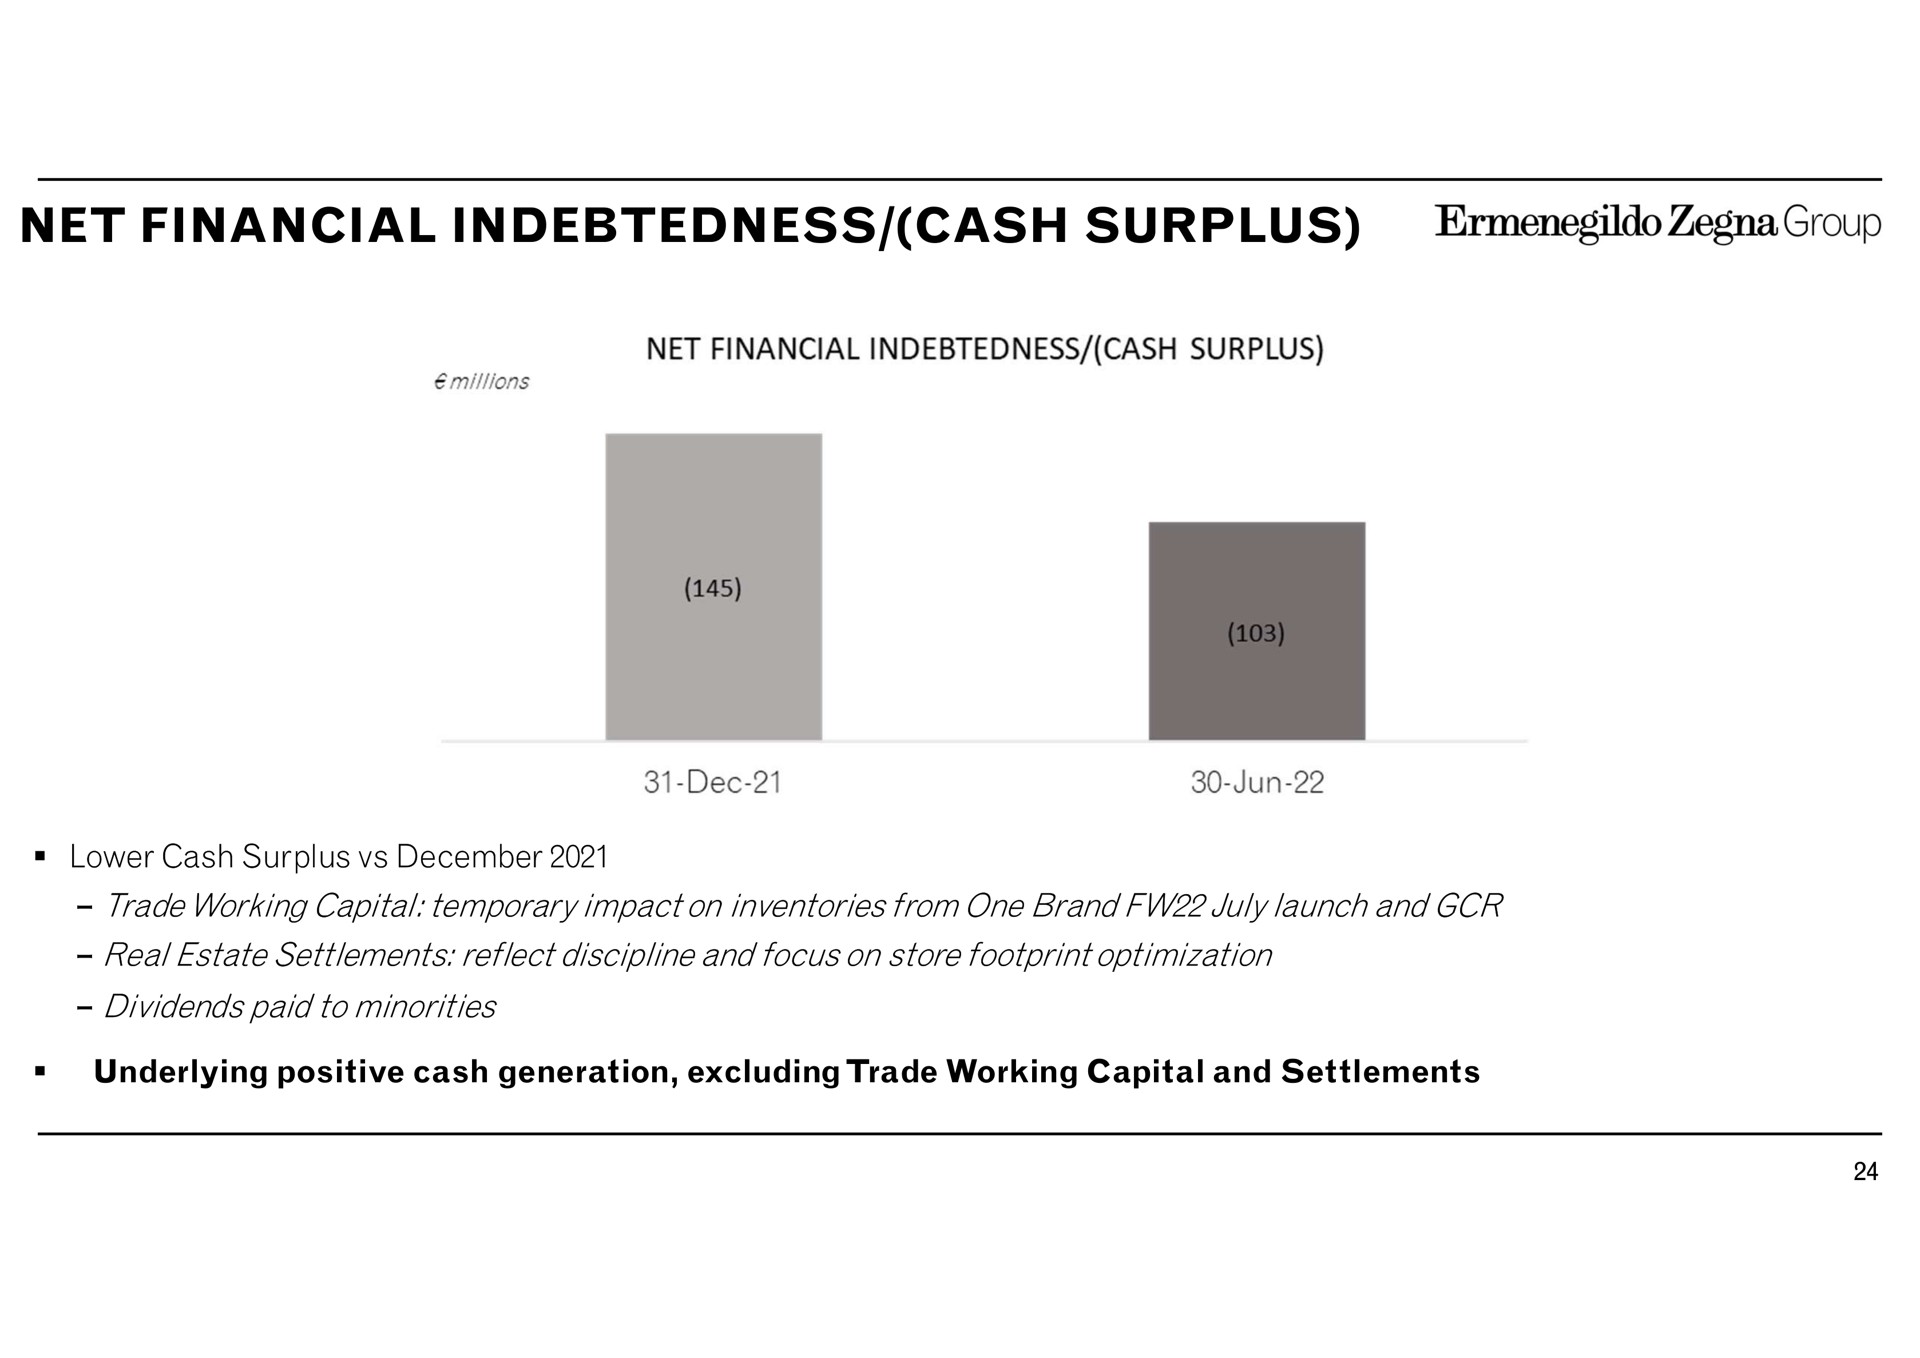 net financial indebtedness cash surplus lower cash surplus trade working capital temporary impact on inventories from one brand launch and real estate settlements reflect discipline and focus on store footprint optimization dividends paid to minorities underlying positive cash generation excluding trade working capital and settlements group millions | Zegna